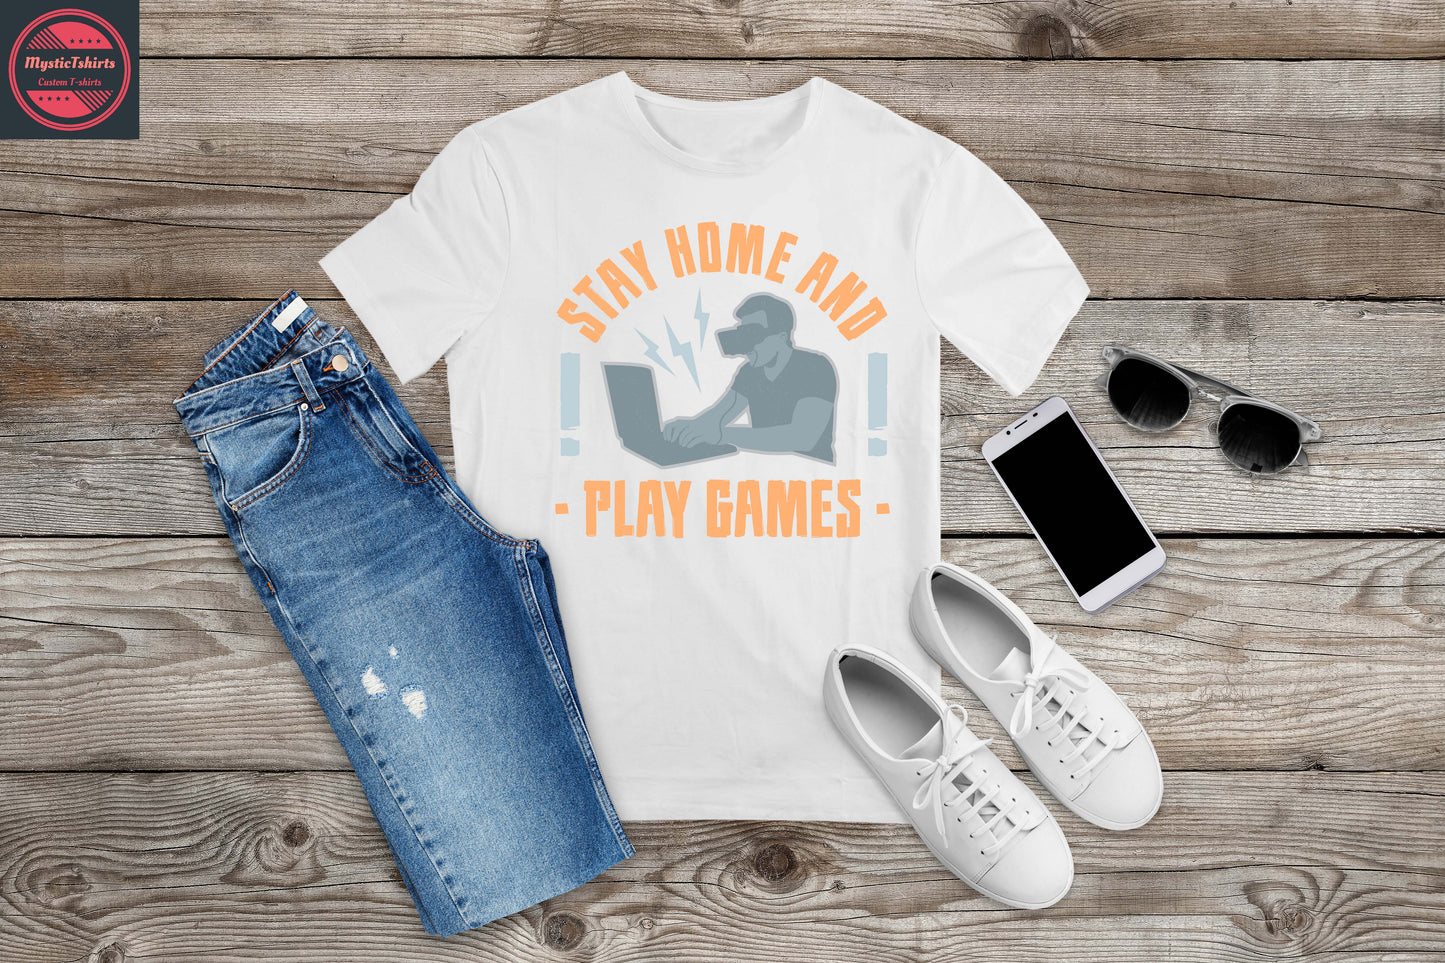 445. STAY HOME AND PLAY GAMES, Custom Made Shirt, Personalized T-Shirt, Custom Text, Make Your Own Shirt, Custom Tee